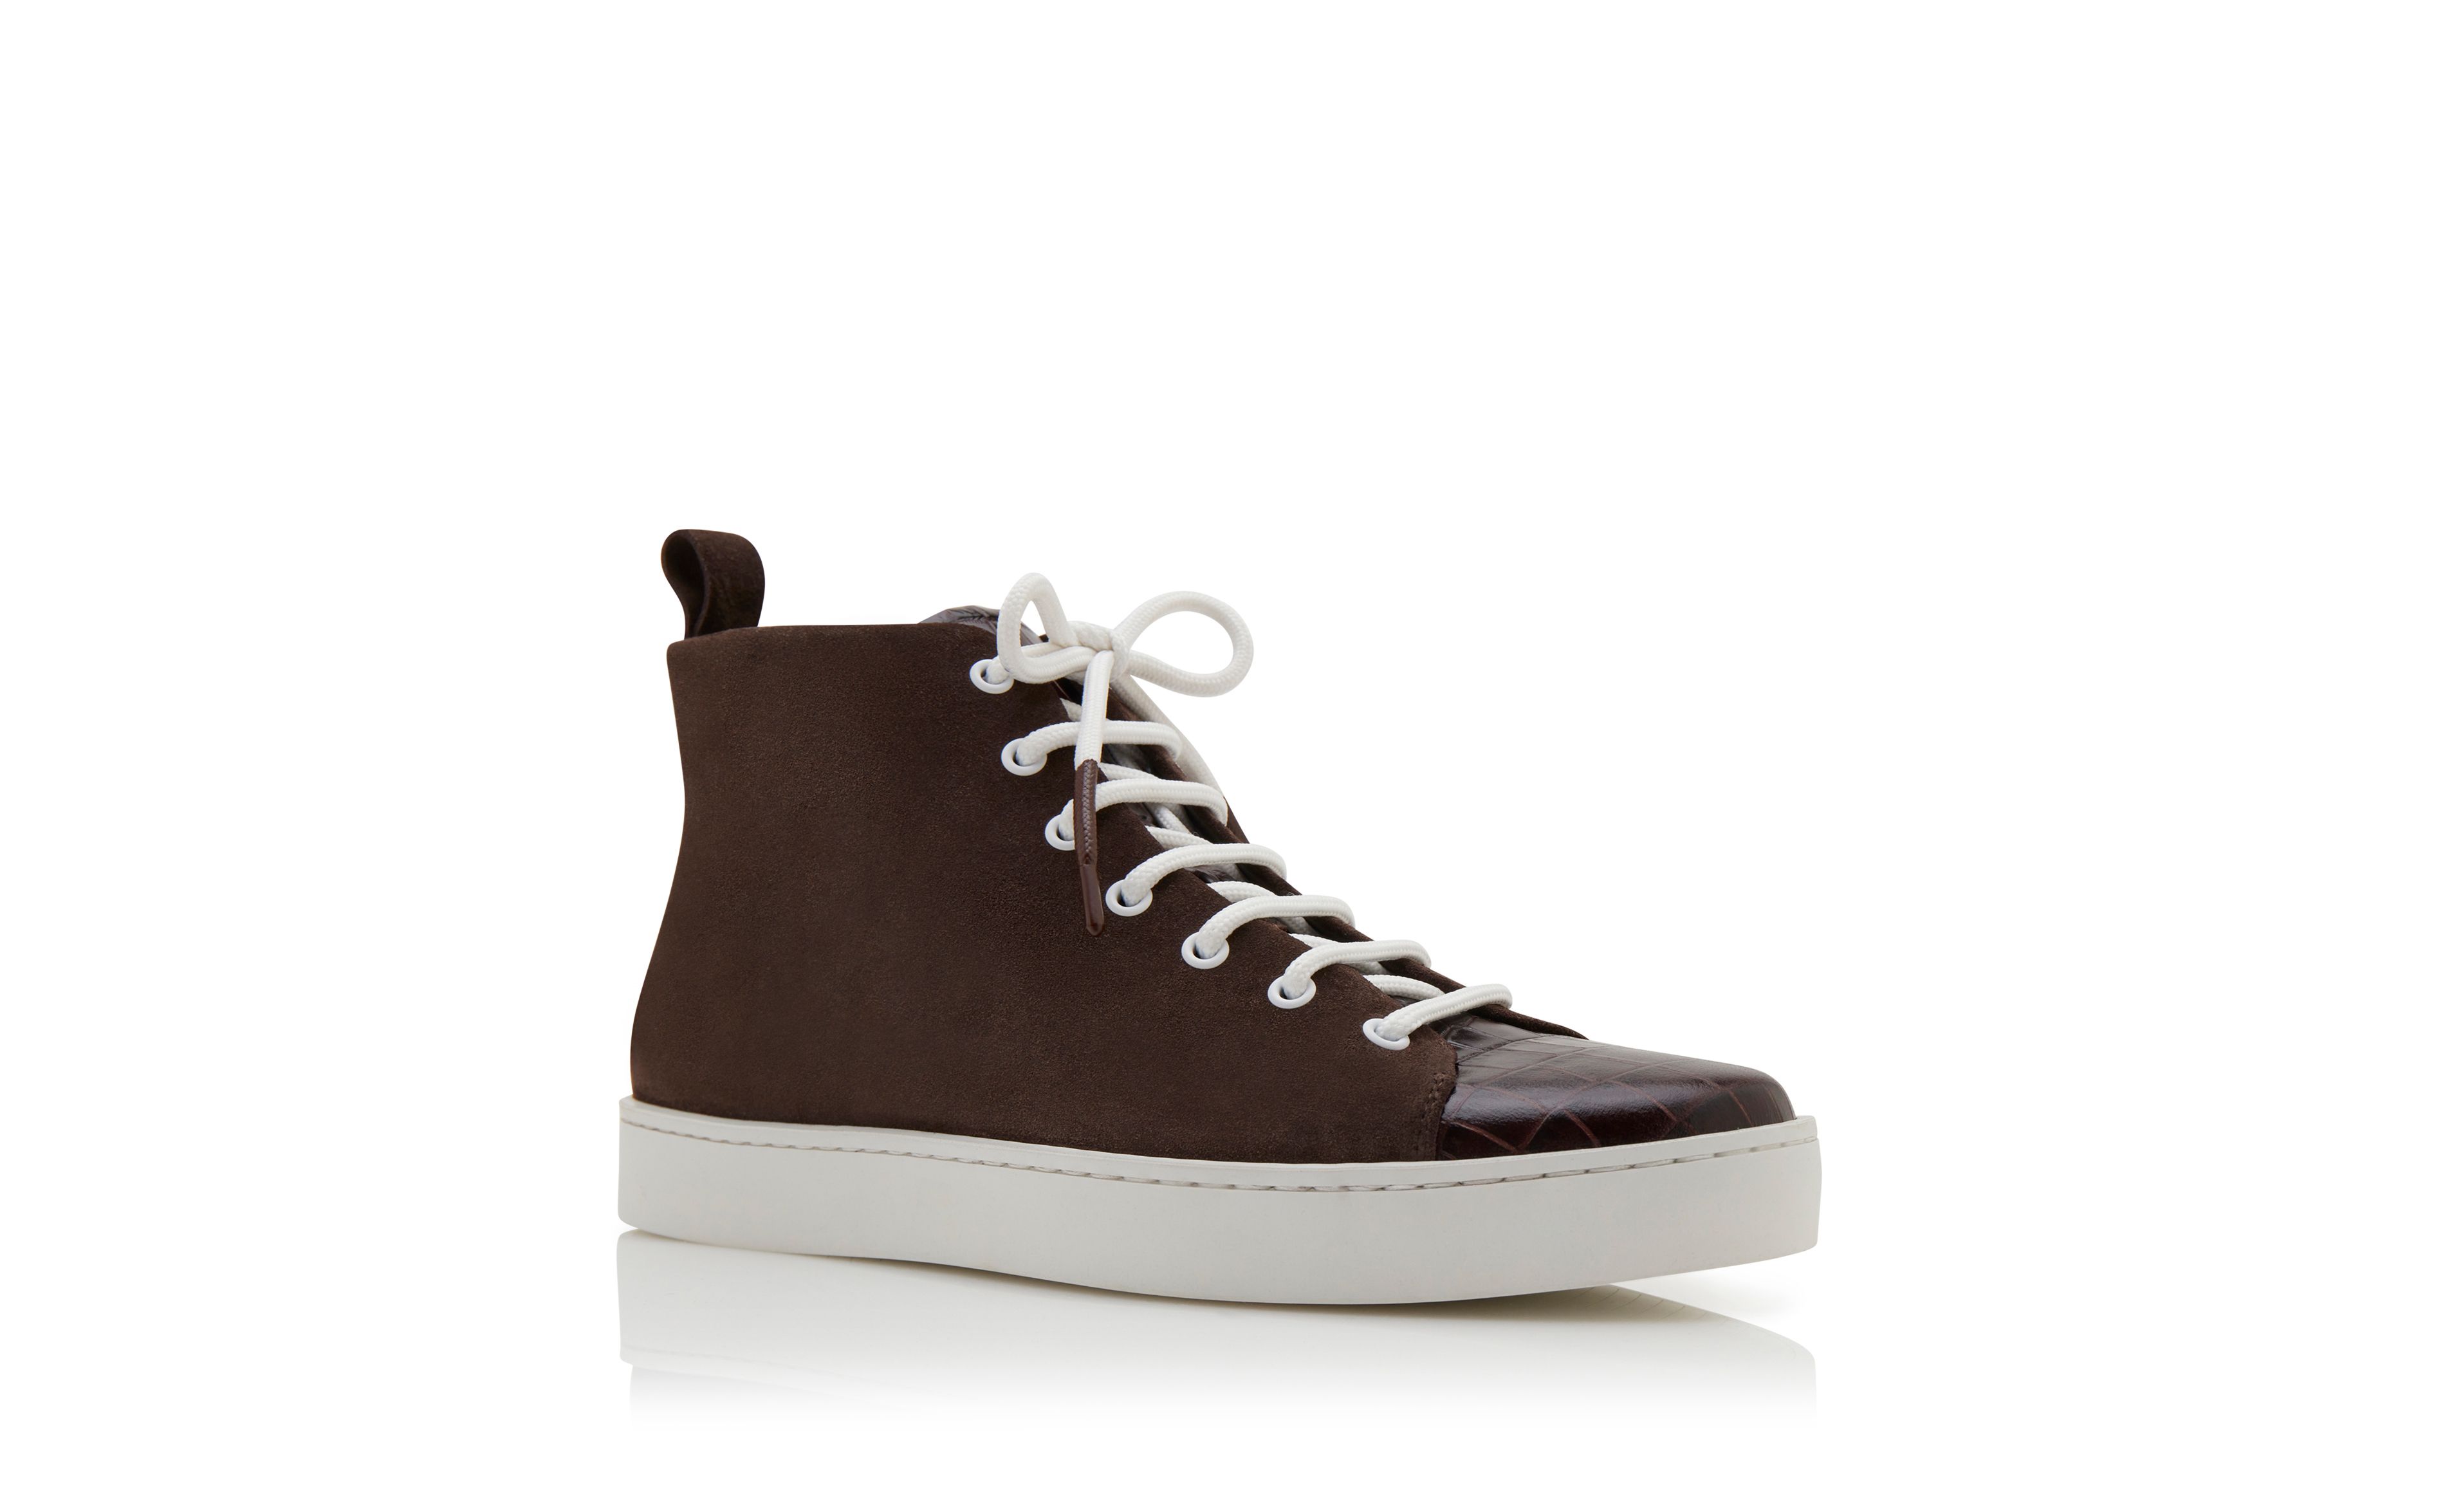 Designer Brown Calf Leather Lace Up Sneakers - Image Upsell